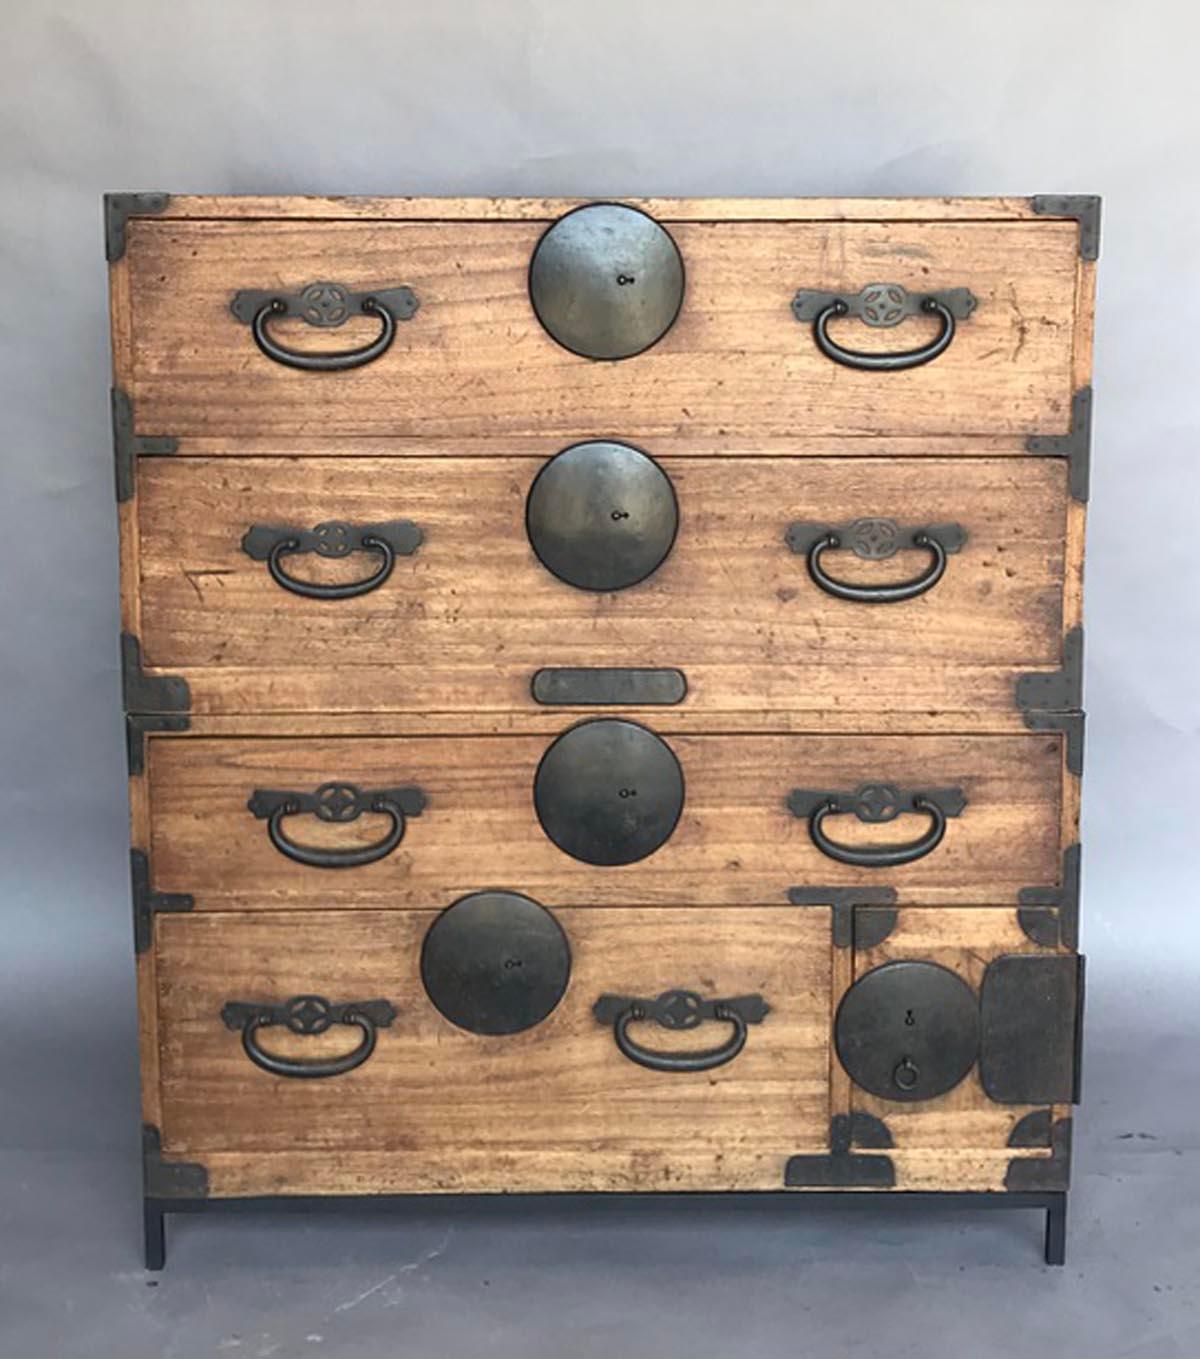 Very functional, hinoki wood Japanese tansu on custom iron base. This tansu has four drawers and one small compartment with two small drawers. All original. Works as a chest of drawers or can be separated and used as nightstands or side tables.